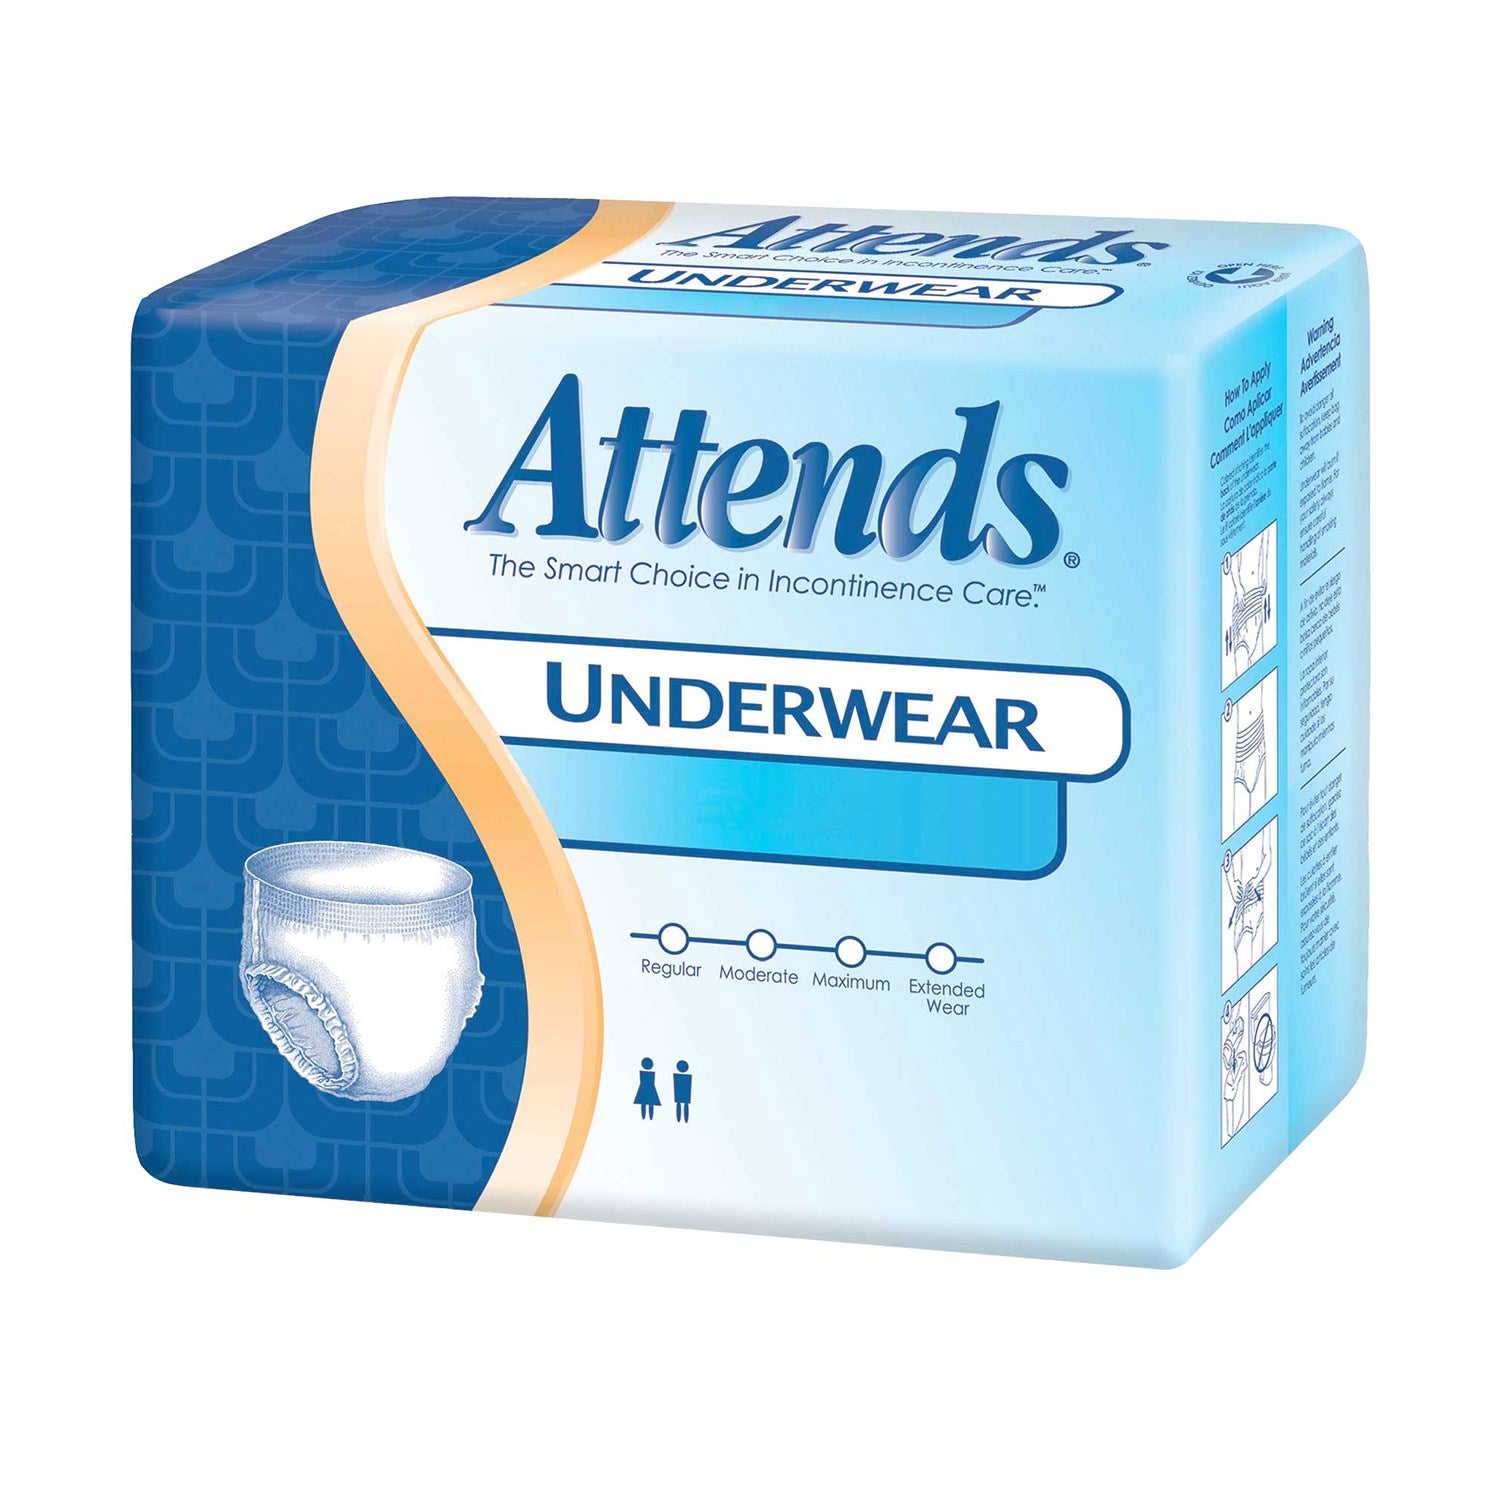 Depend Adult Briefs, Diaper Style, Maximum Fitted Protection, Size Large,  Full Case of 48 (217-0603)